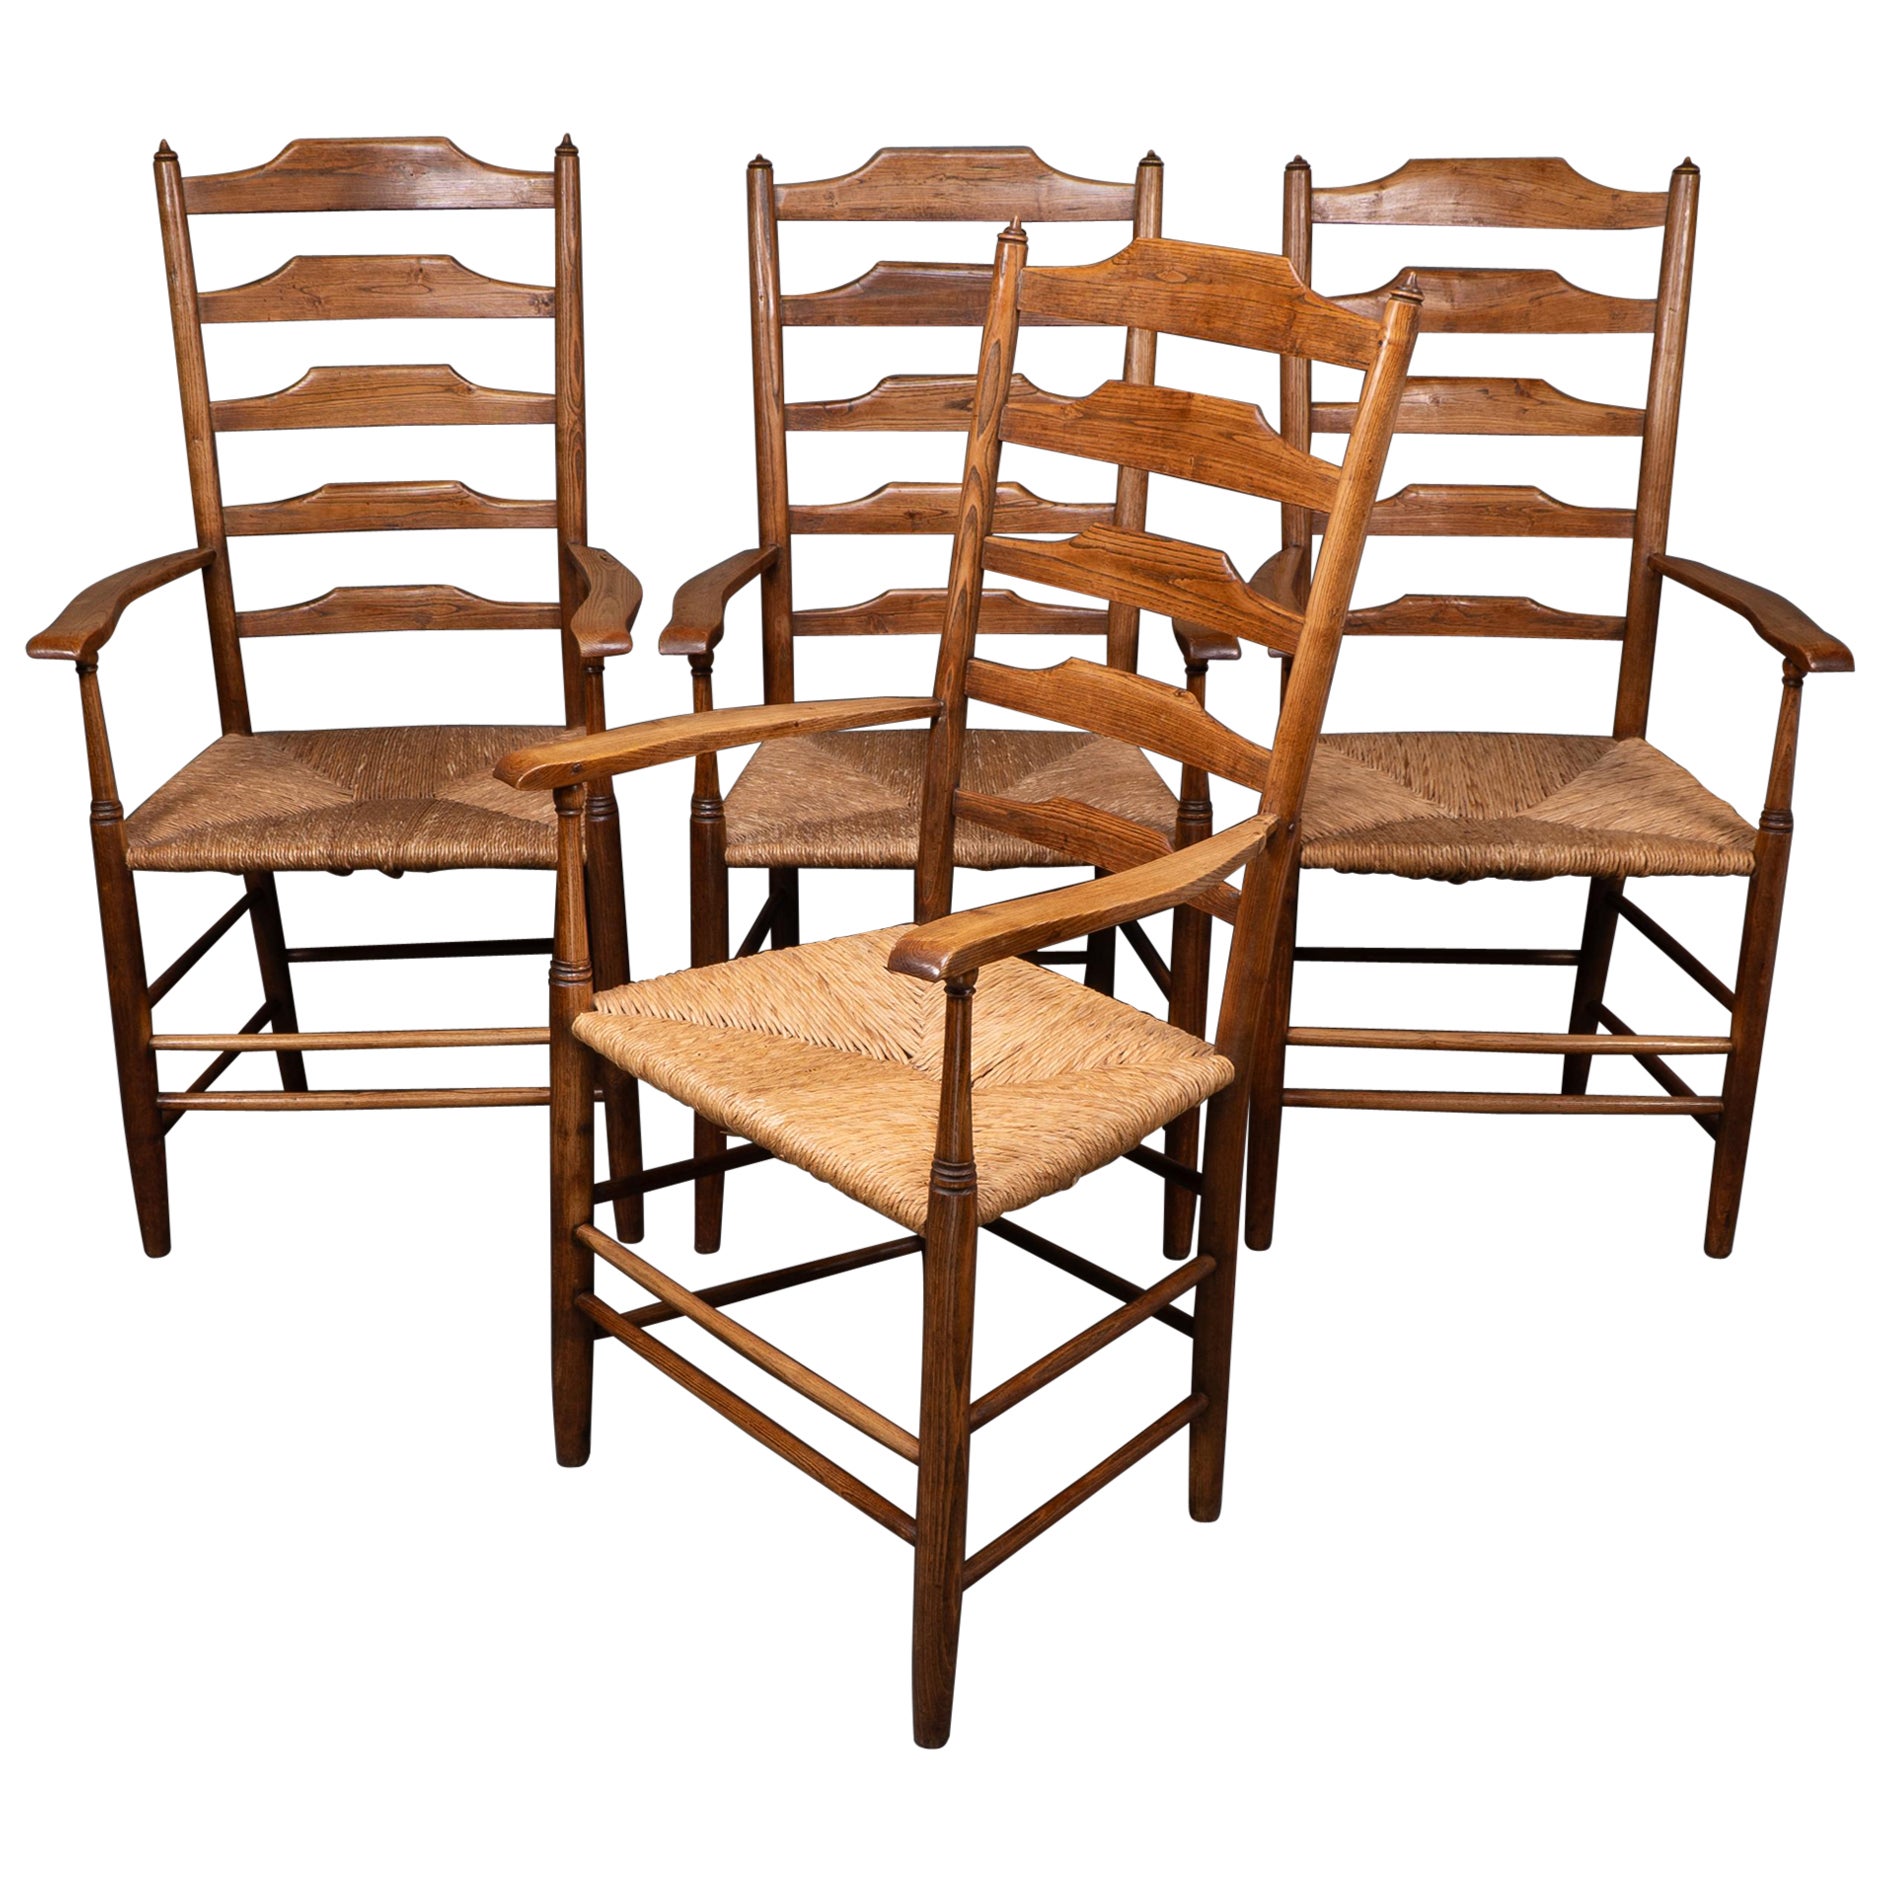 Philip Clissett A fine set of four early Arts & Crafts ash ladder back armchairs For Sale